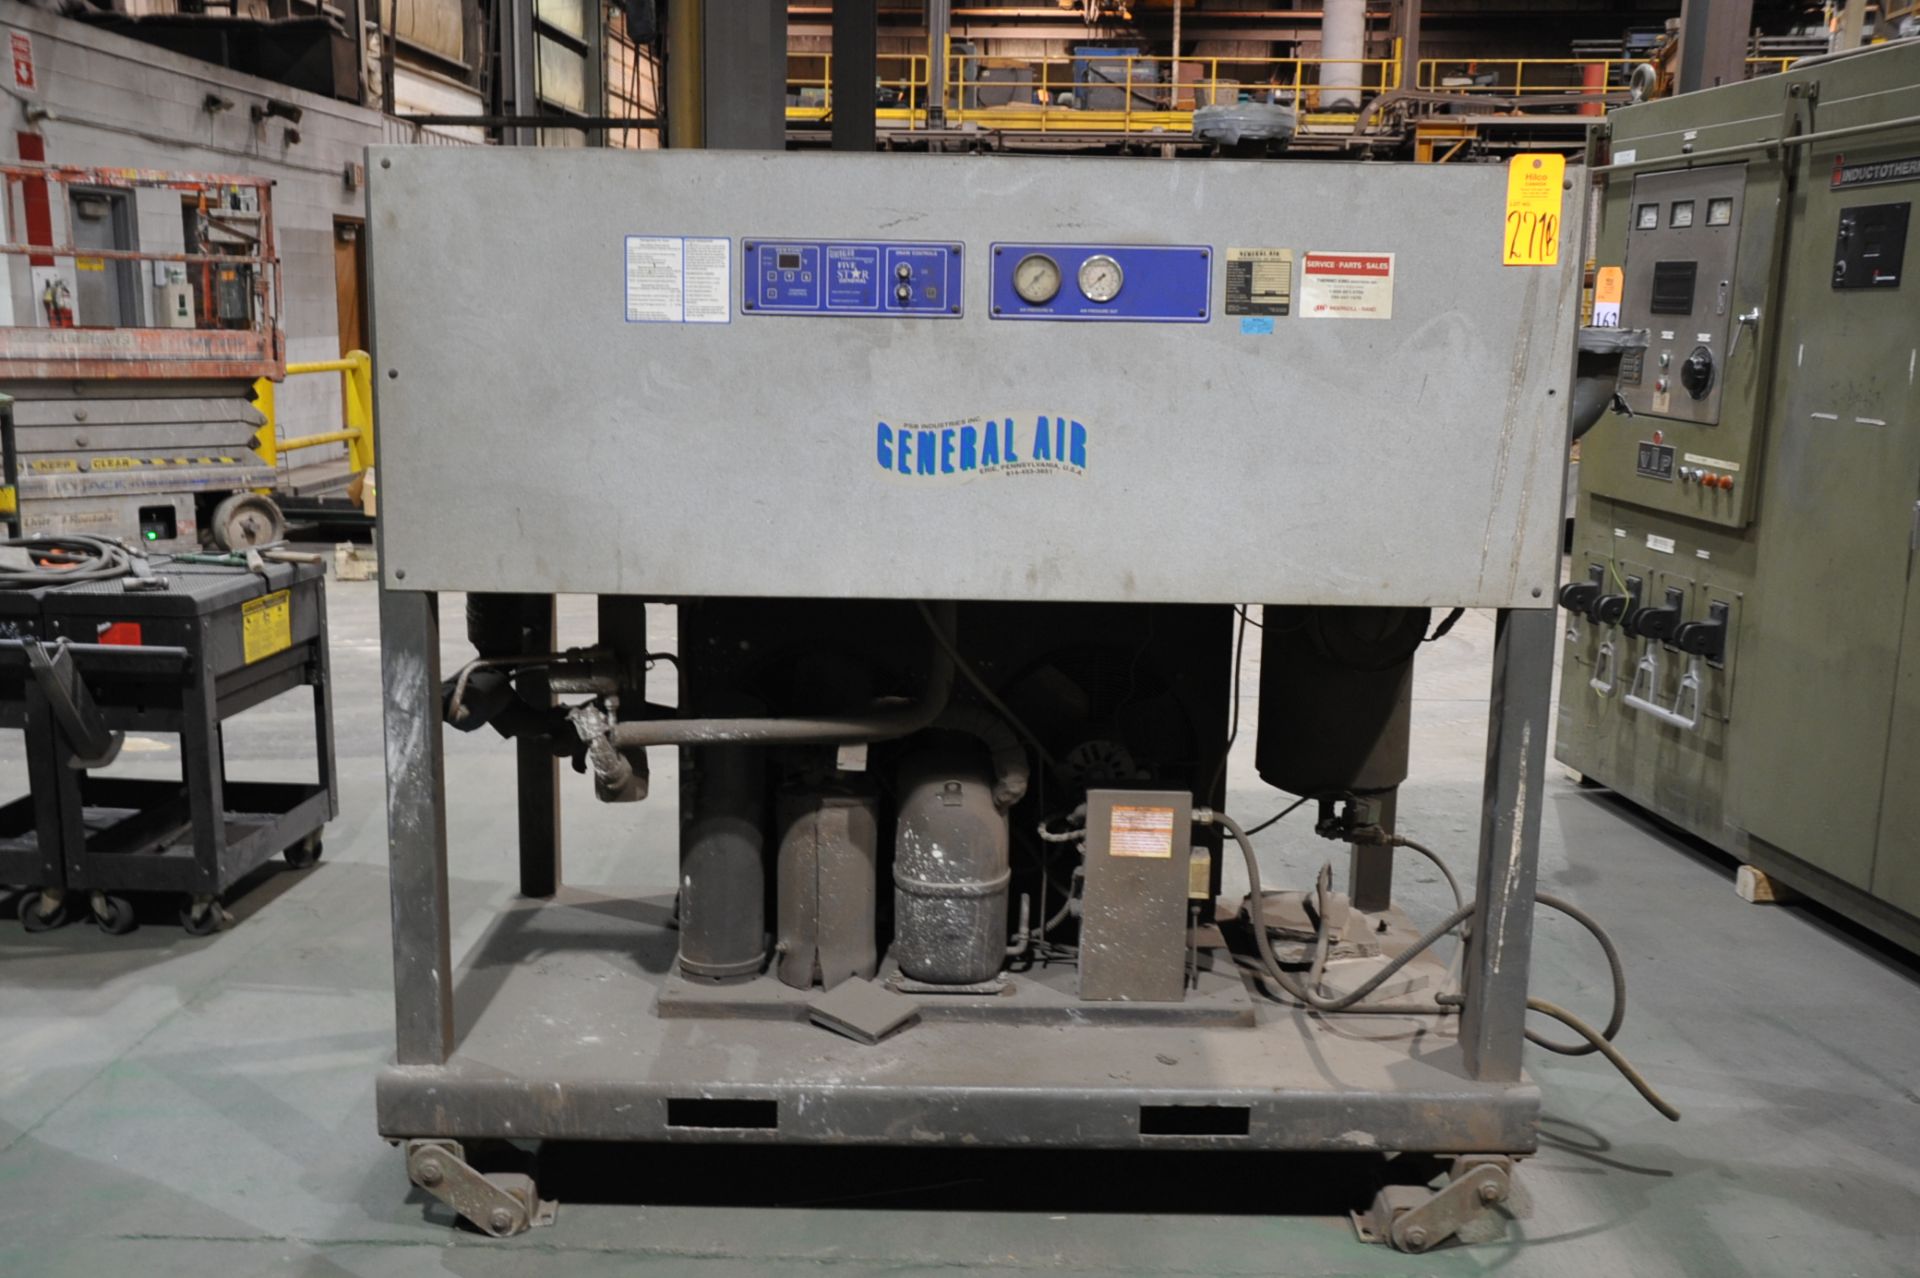 General Air Model G5-250 5 Hp Refrigerated Air Dryer